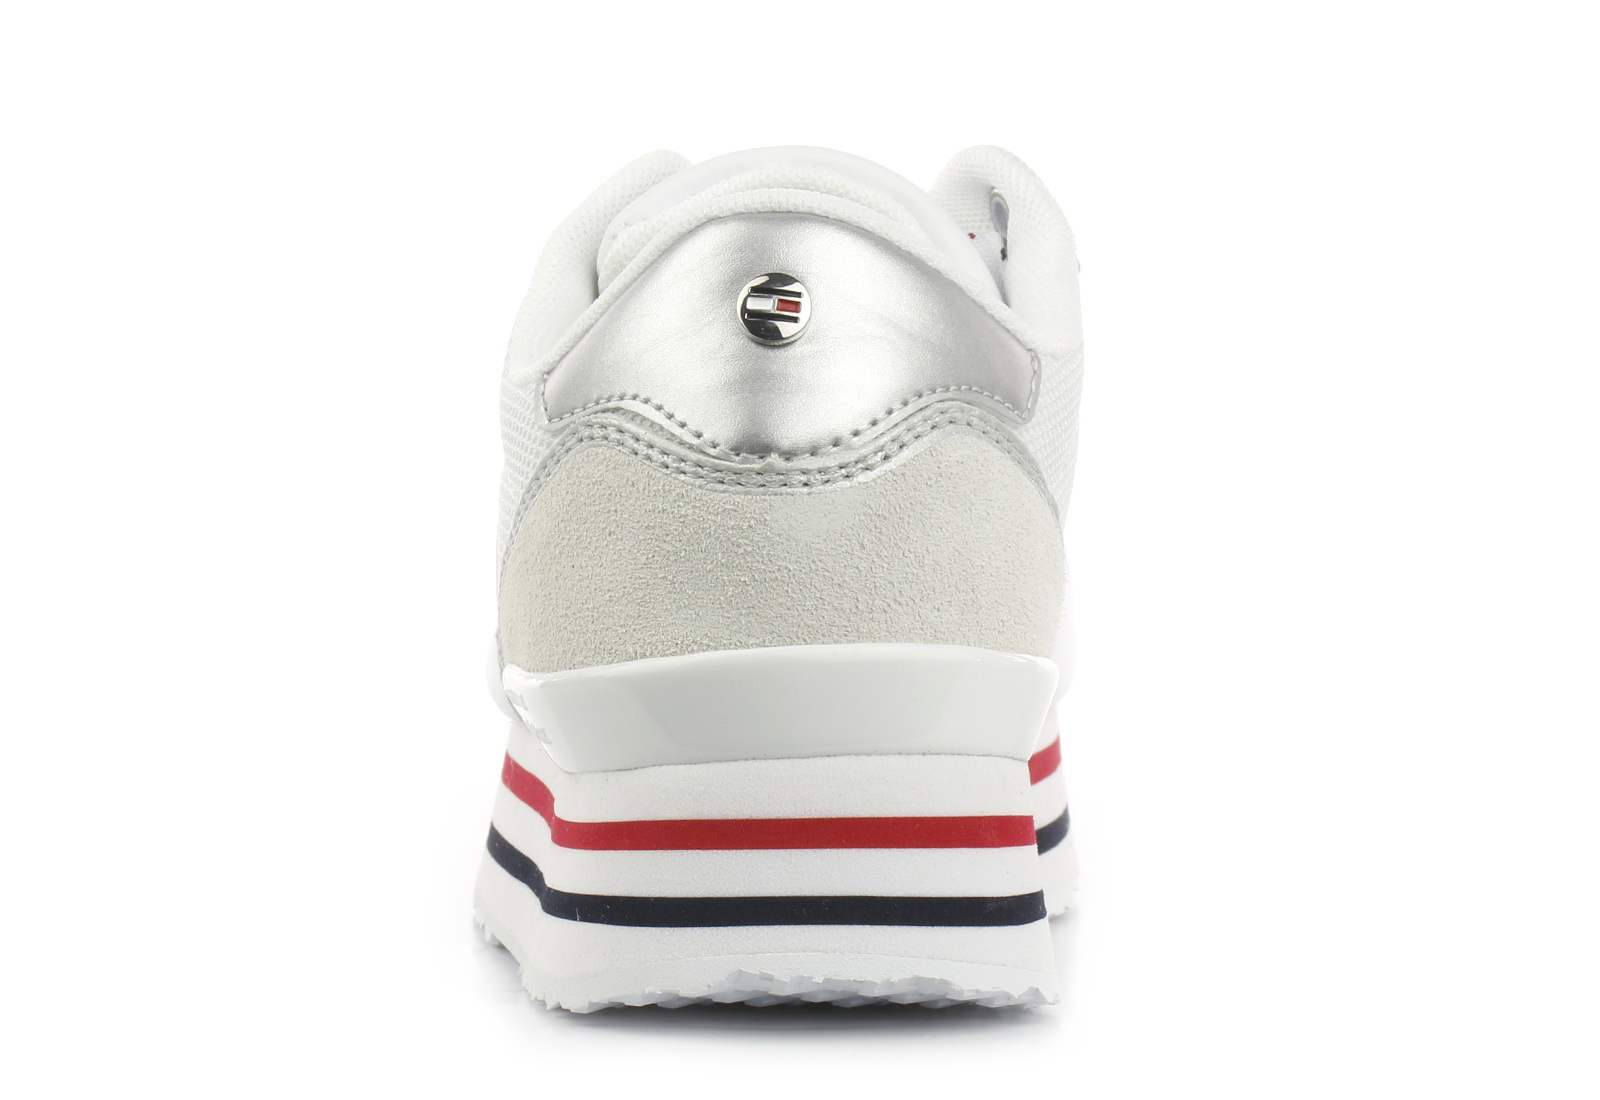 Tommy Hilfiger Sneakers - Briana 3c - FW0-6449-0GY - Online for sneakers, and boots